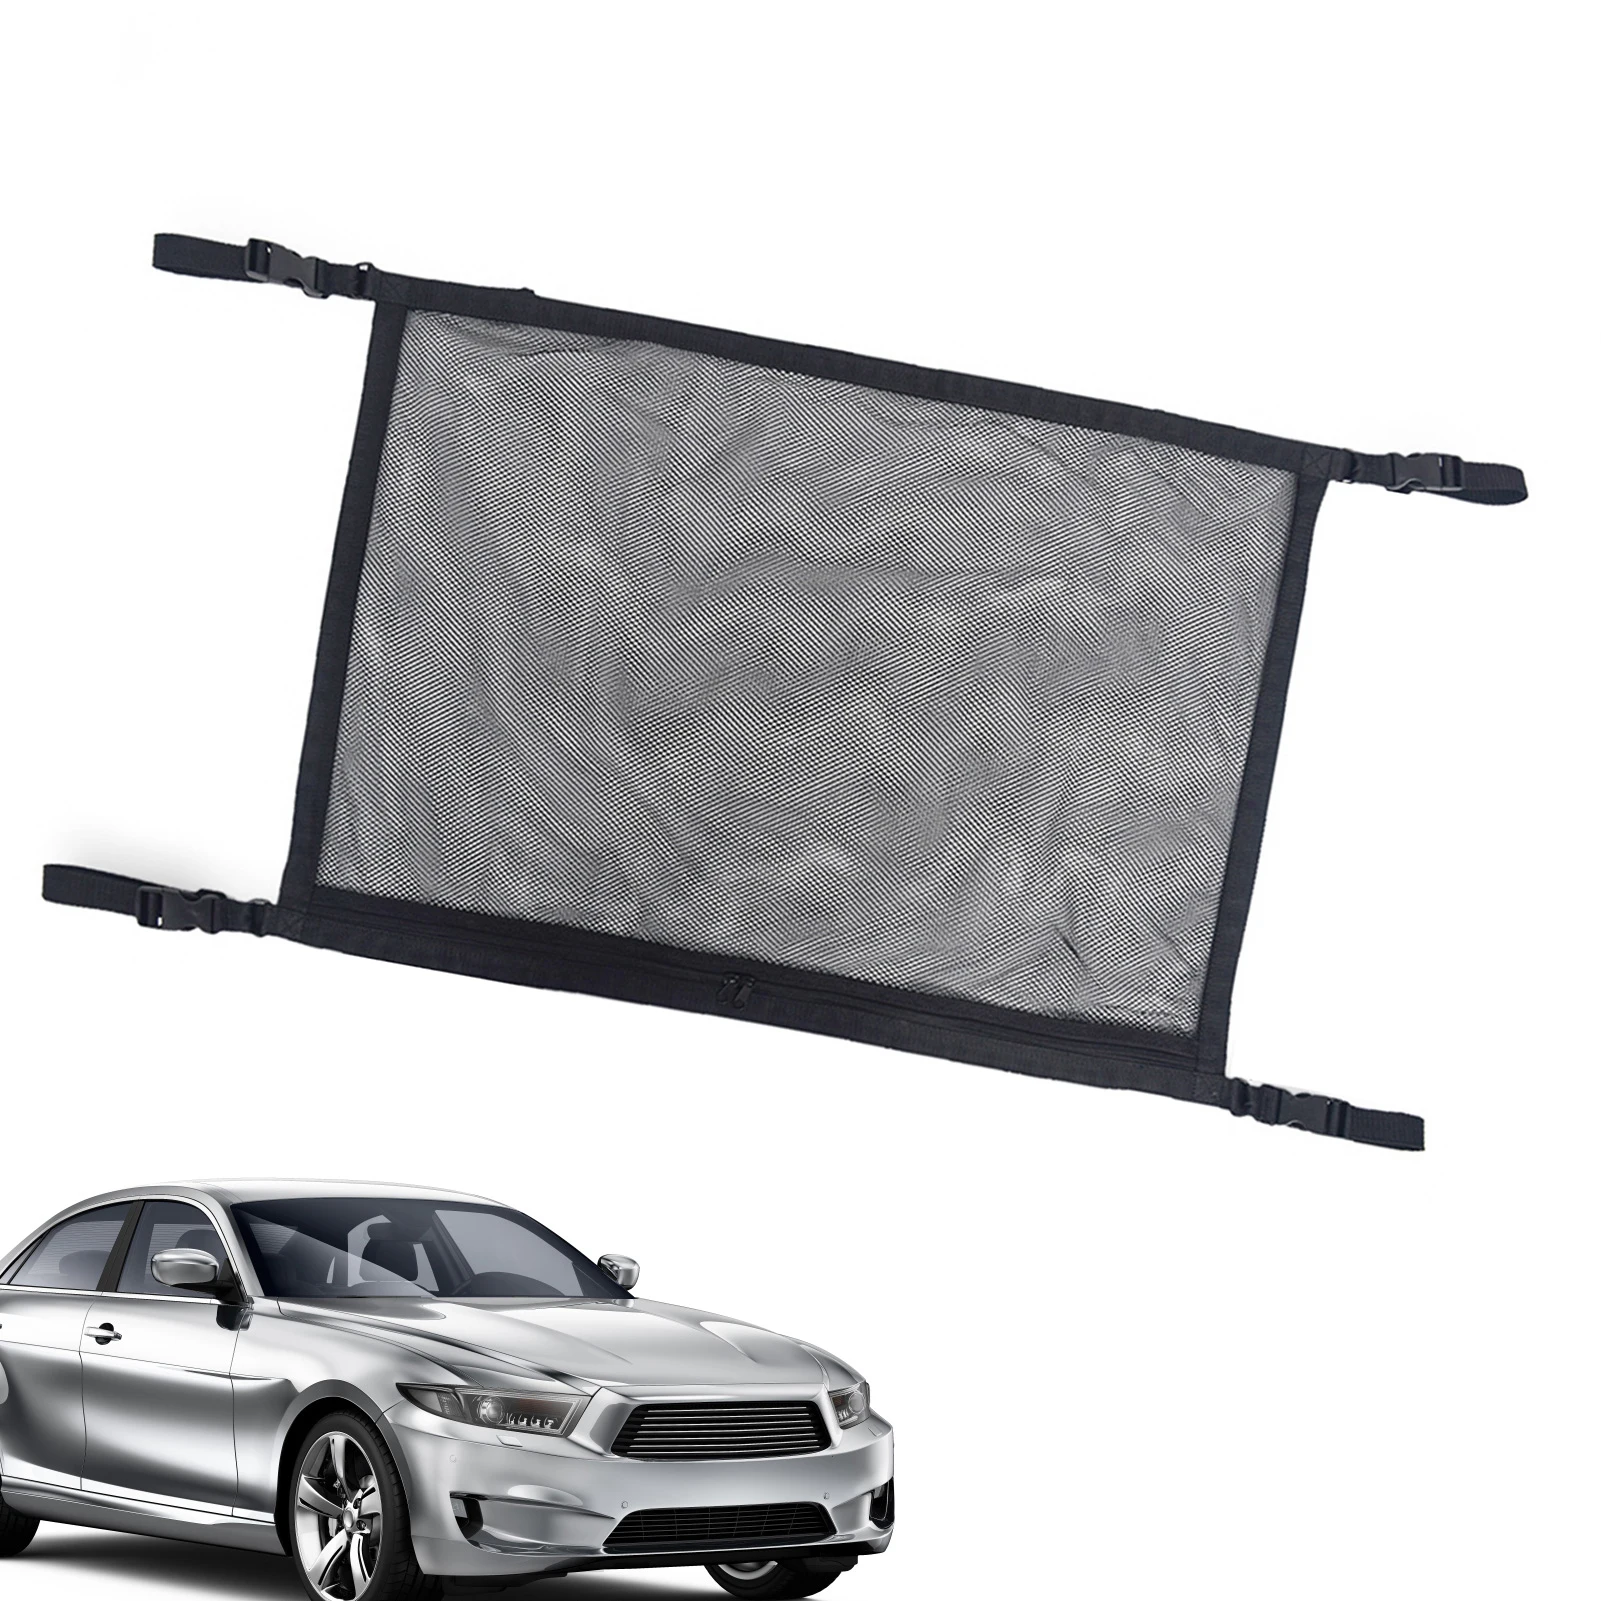 

Car Ceiling Storage Net Car Ceiling Net Pocket Rooftop Carrier Strengthen Load-Bearing And Droop Less Double-Layer Mesh Car